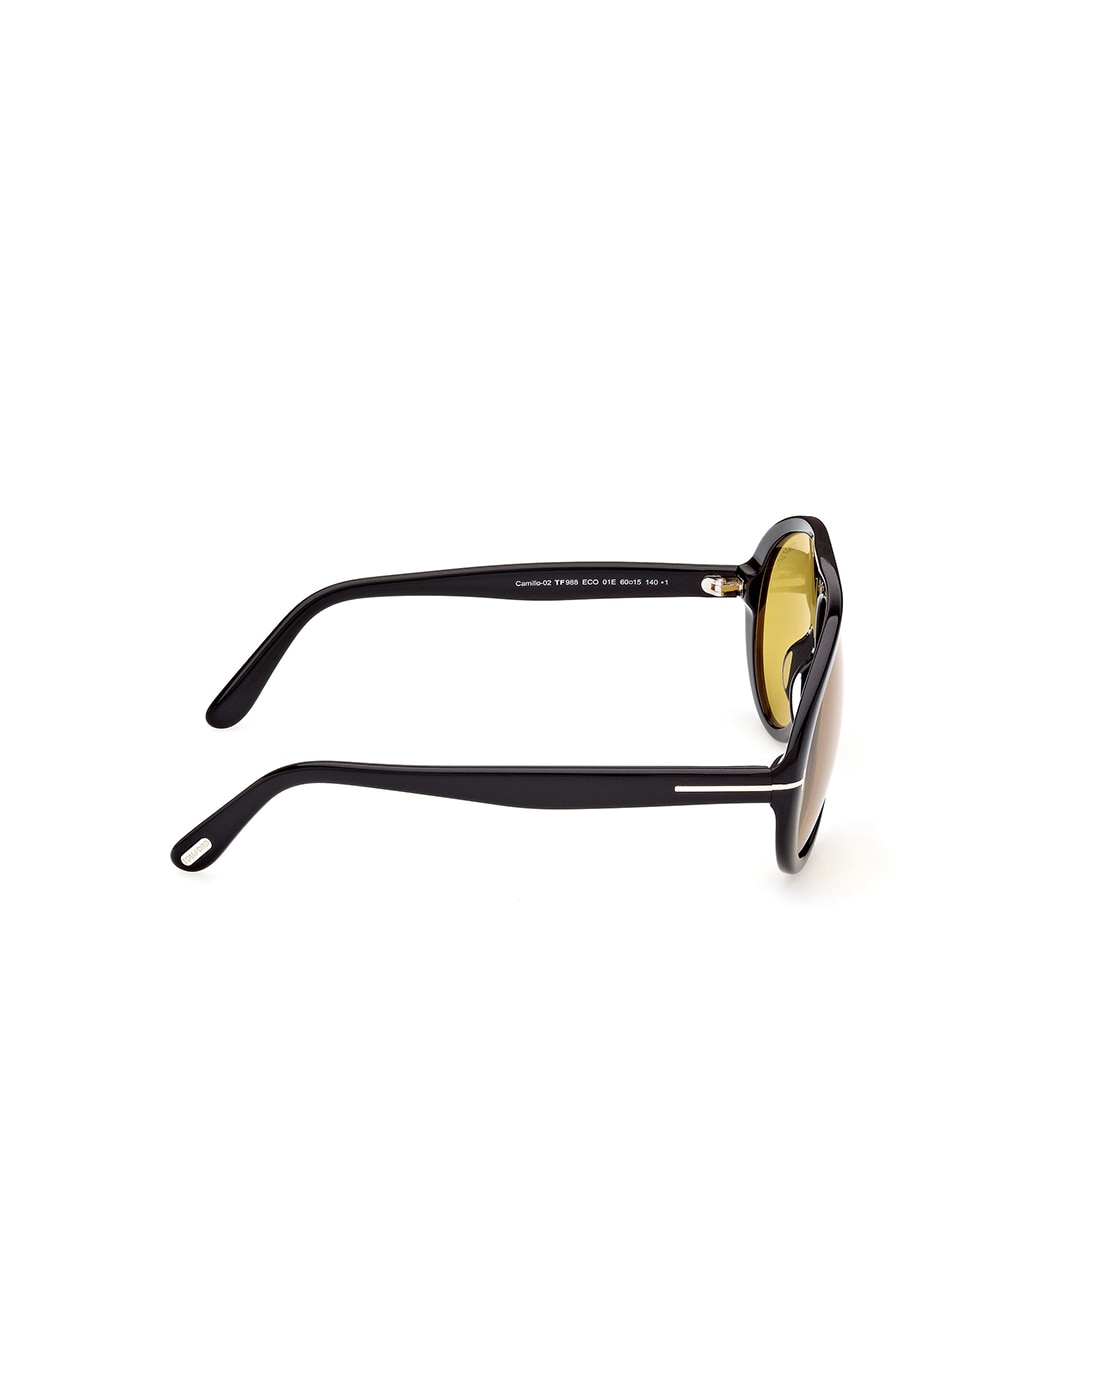 Sunglasses Tom Ford Yellow in Metal - 26107886